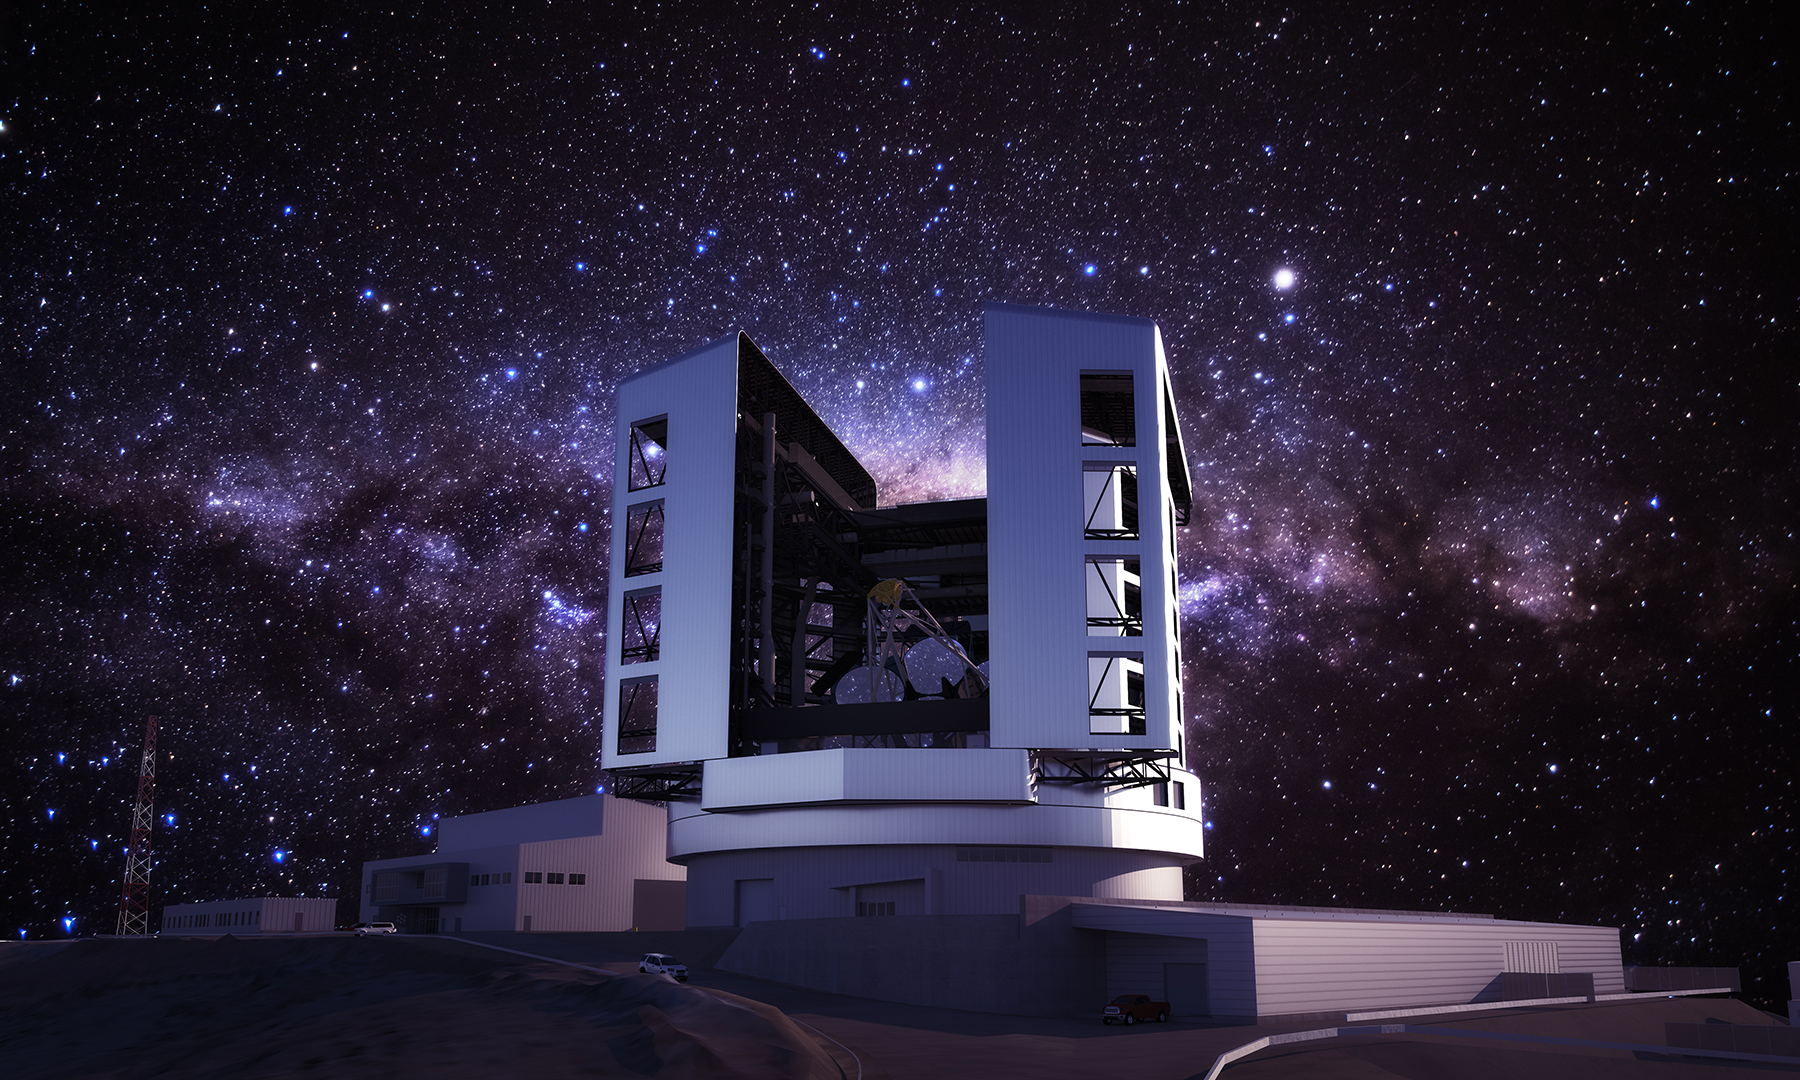 The Giant Magellan Telescope is currently being constructed at Las Campanas Observatory in Chile. With of seven of the world’s largest mirrors ever constructed, each at 8.4 meters in diameter, the GMT will provide ten times better resolution than the Hubble Space Telescope.